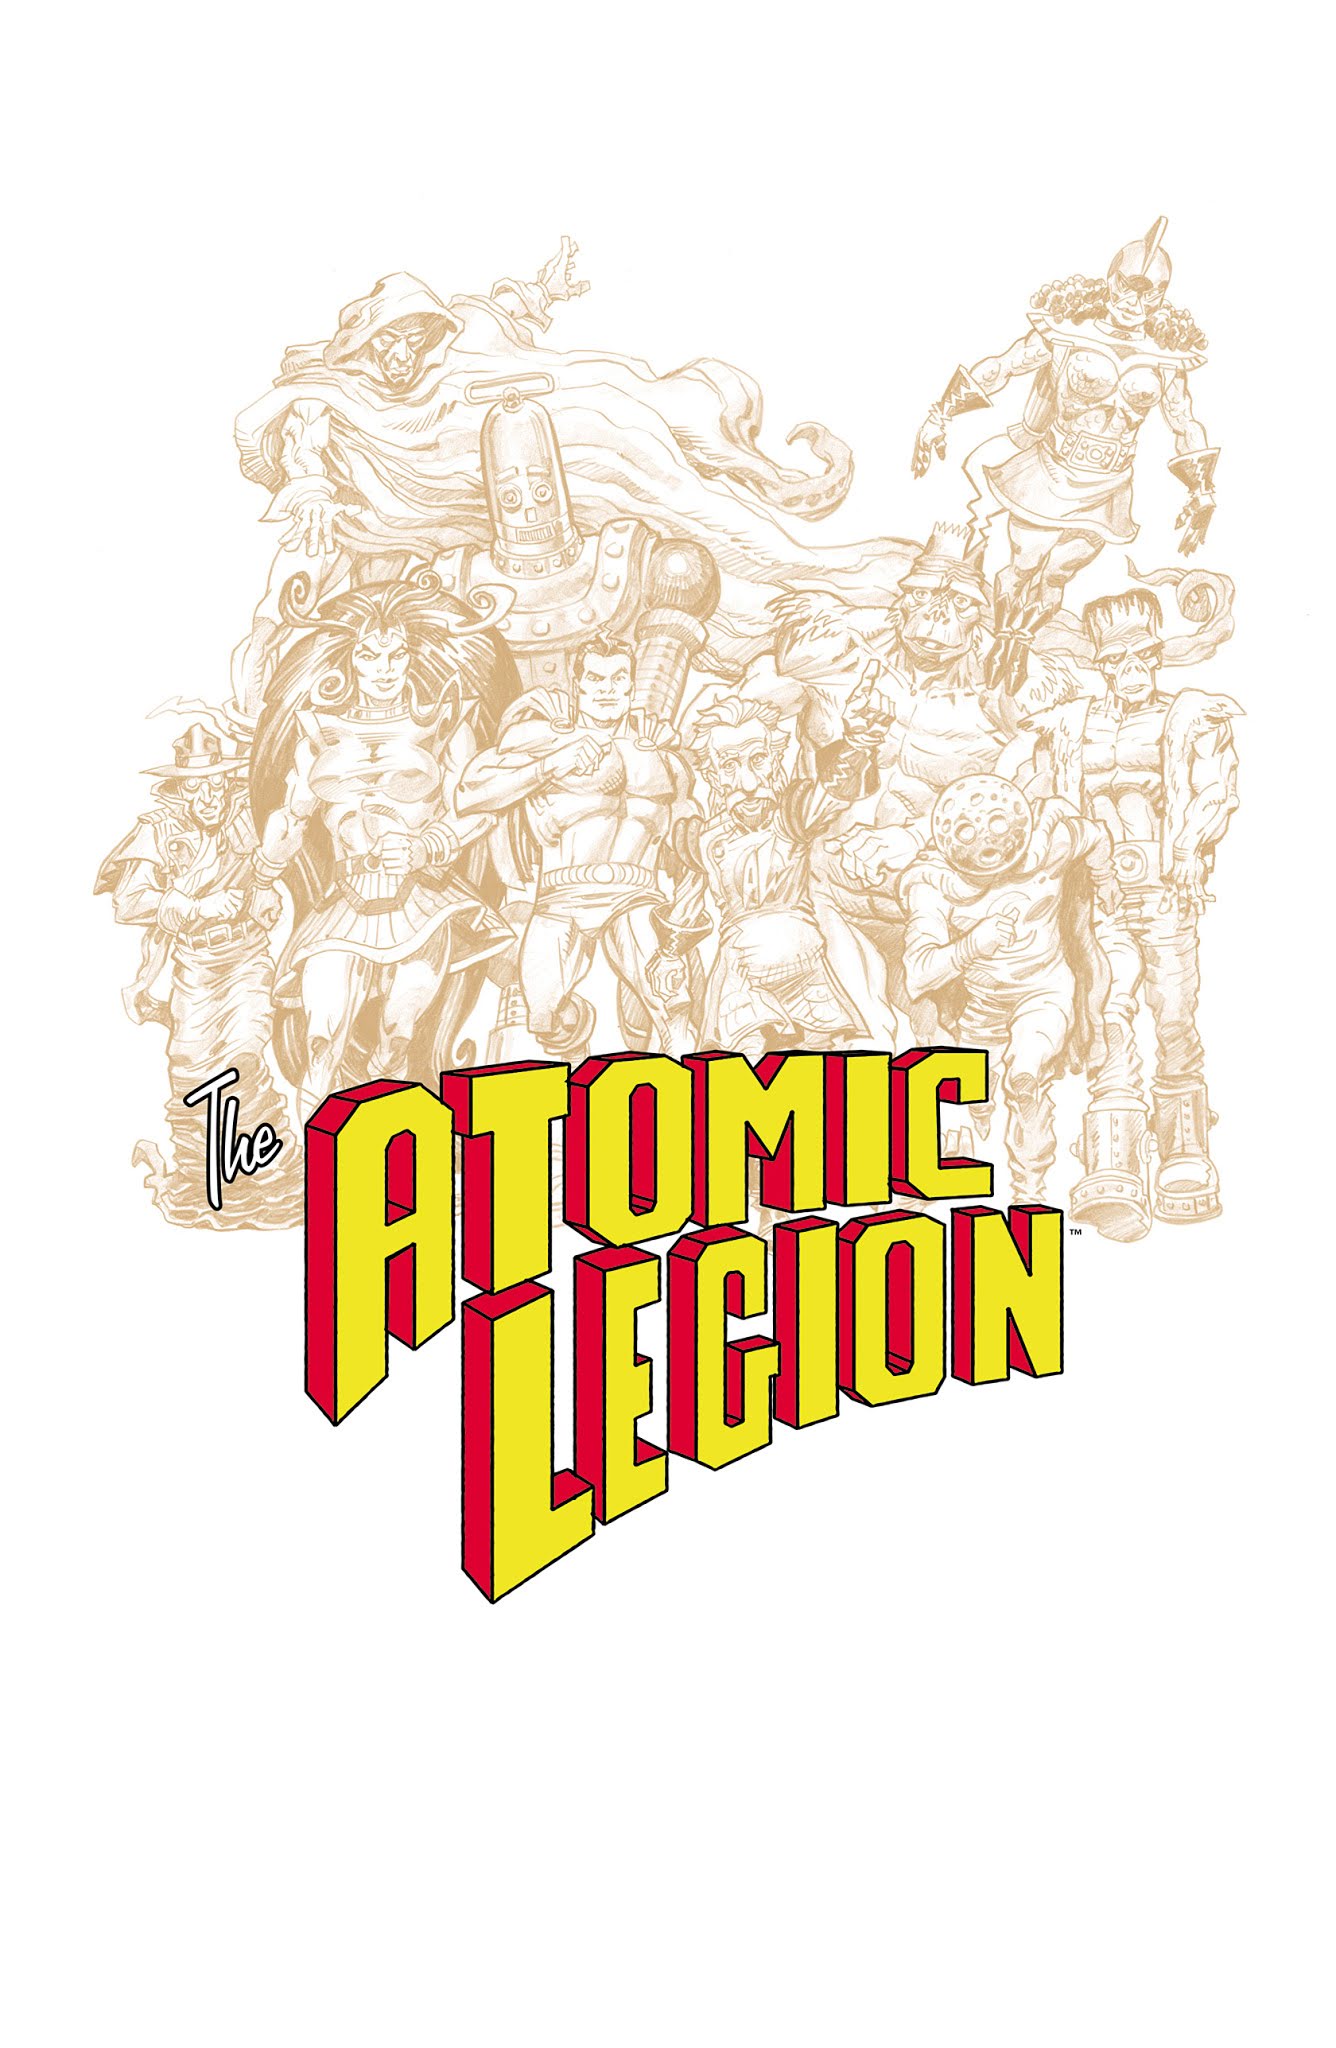 Read online The Atomic Legion comic -  Issue # TPB (Part 1) - 3